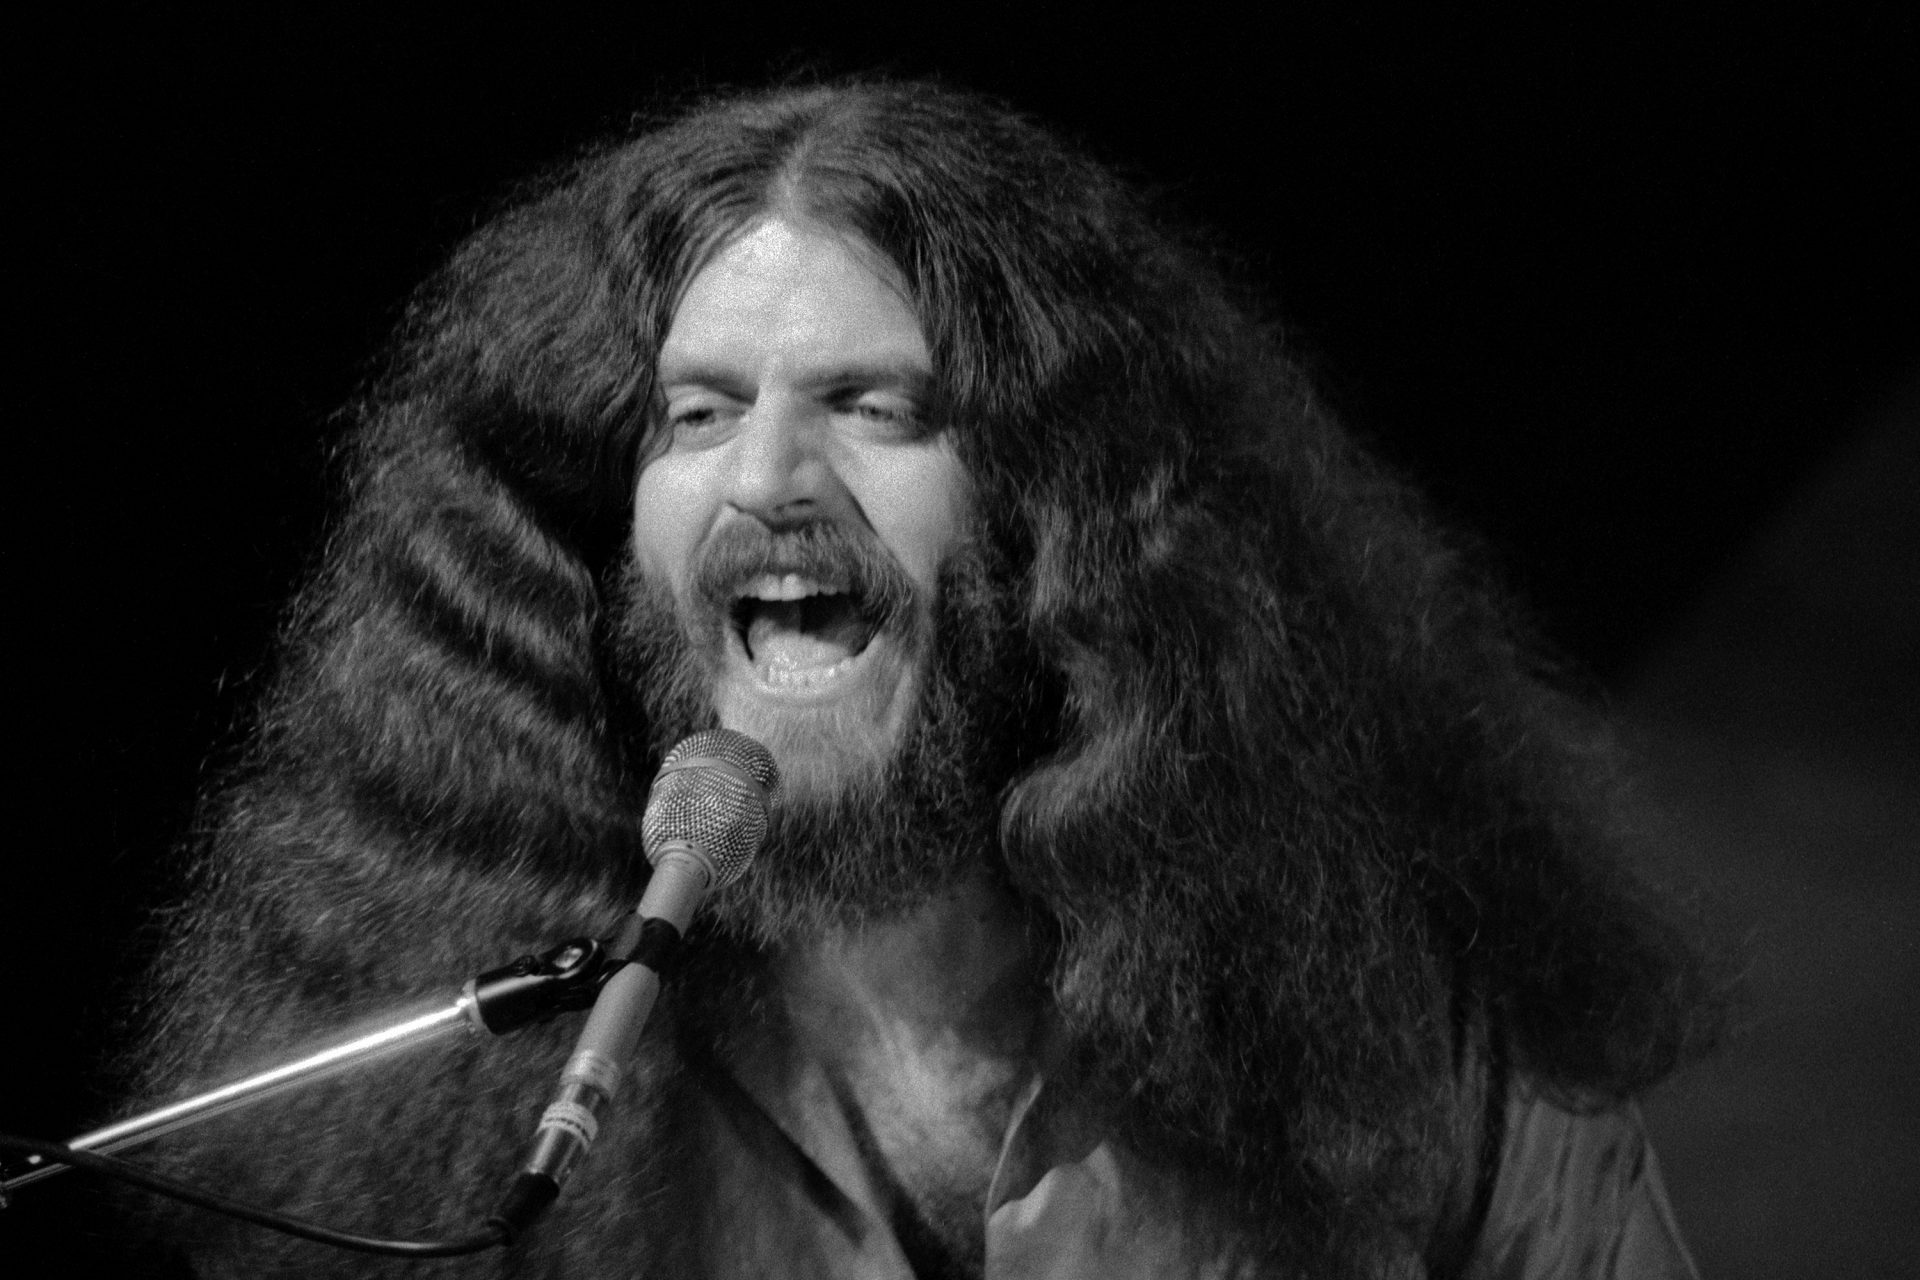 <p>In the 70s, the band's founding members gathered in a garage and played under the name 'White Clover.' Later, they changed it to 'Kansas,' referring to the state they lived in and its rich history.</p> <p>In the image, singer Robby Steinhardt, co-founder of the band in 1973.</p>